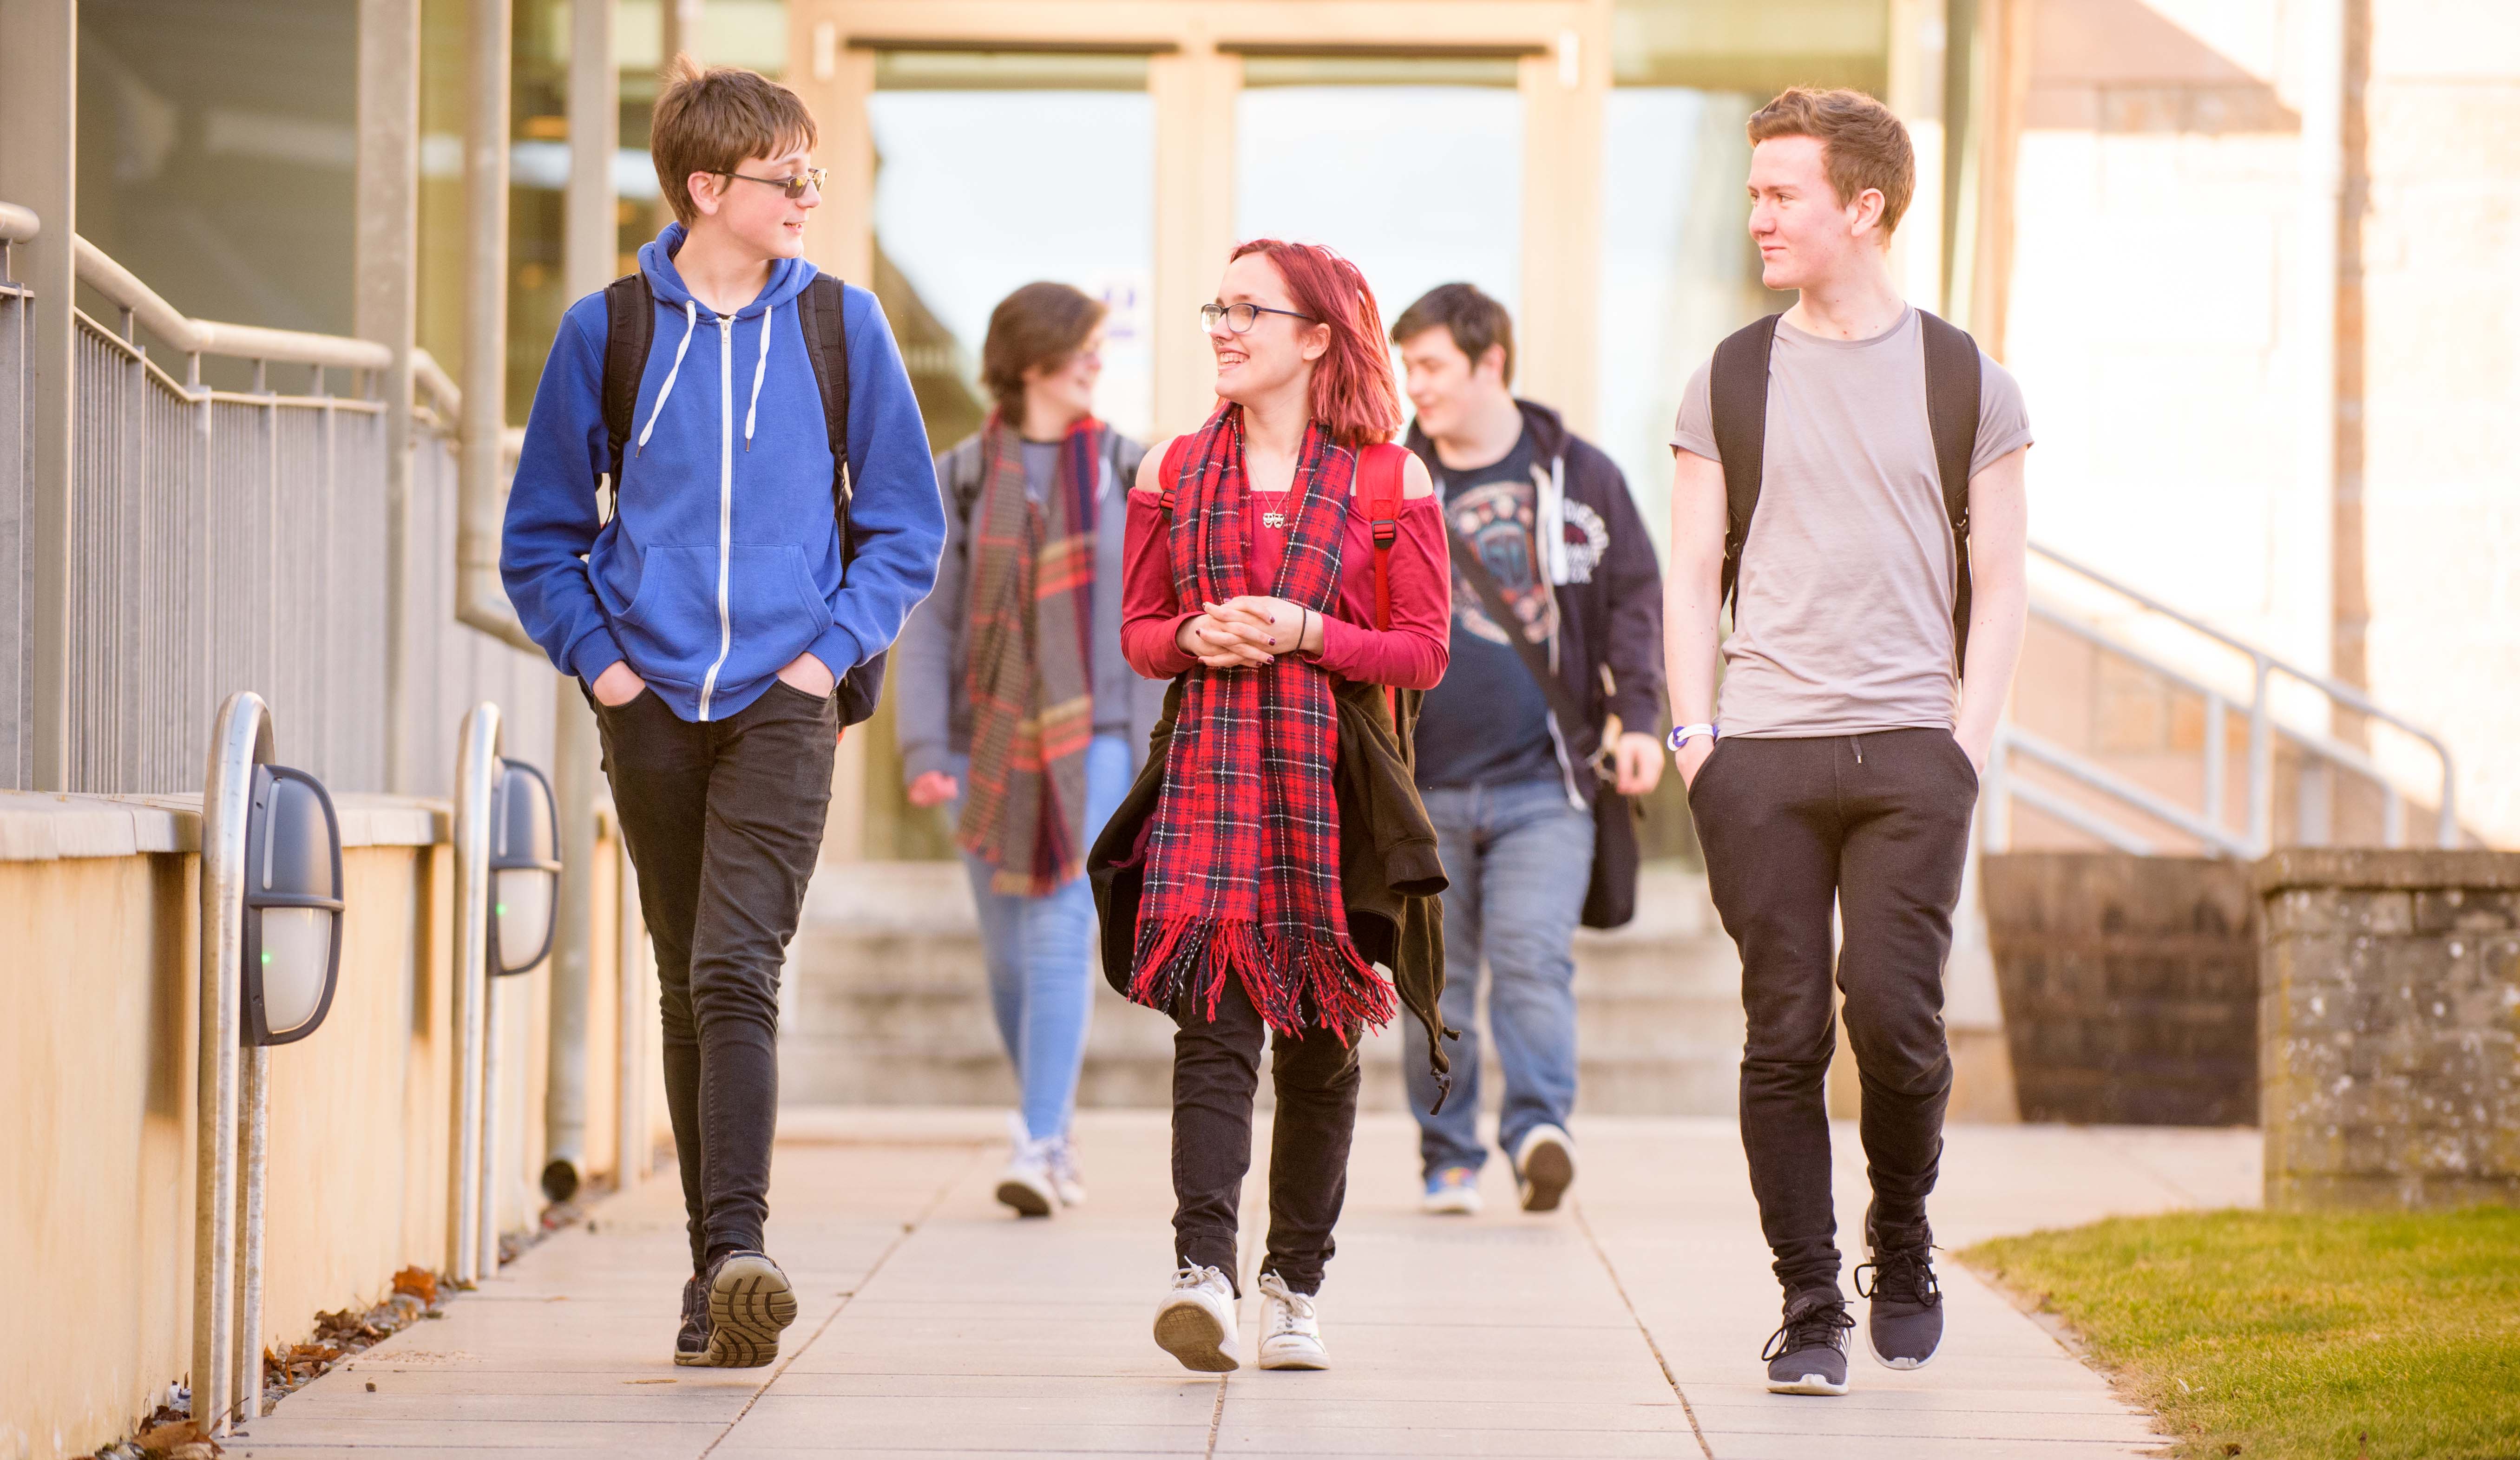 A group of students walking outside a university building